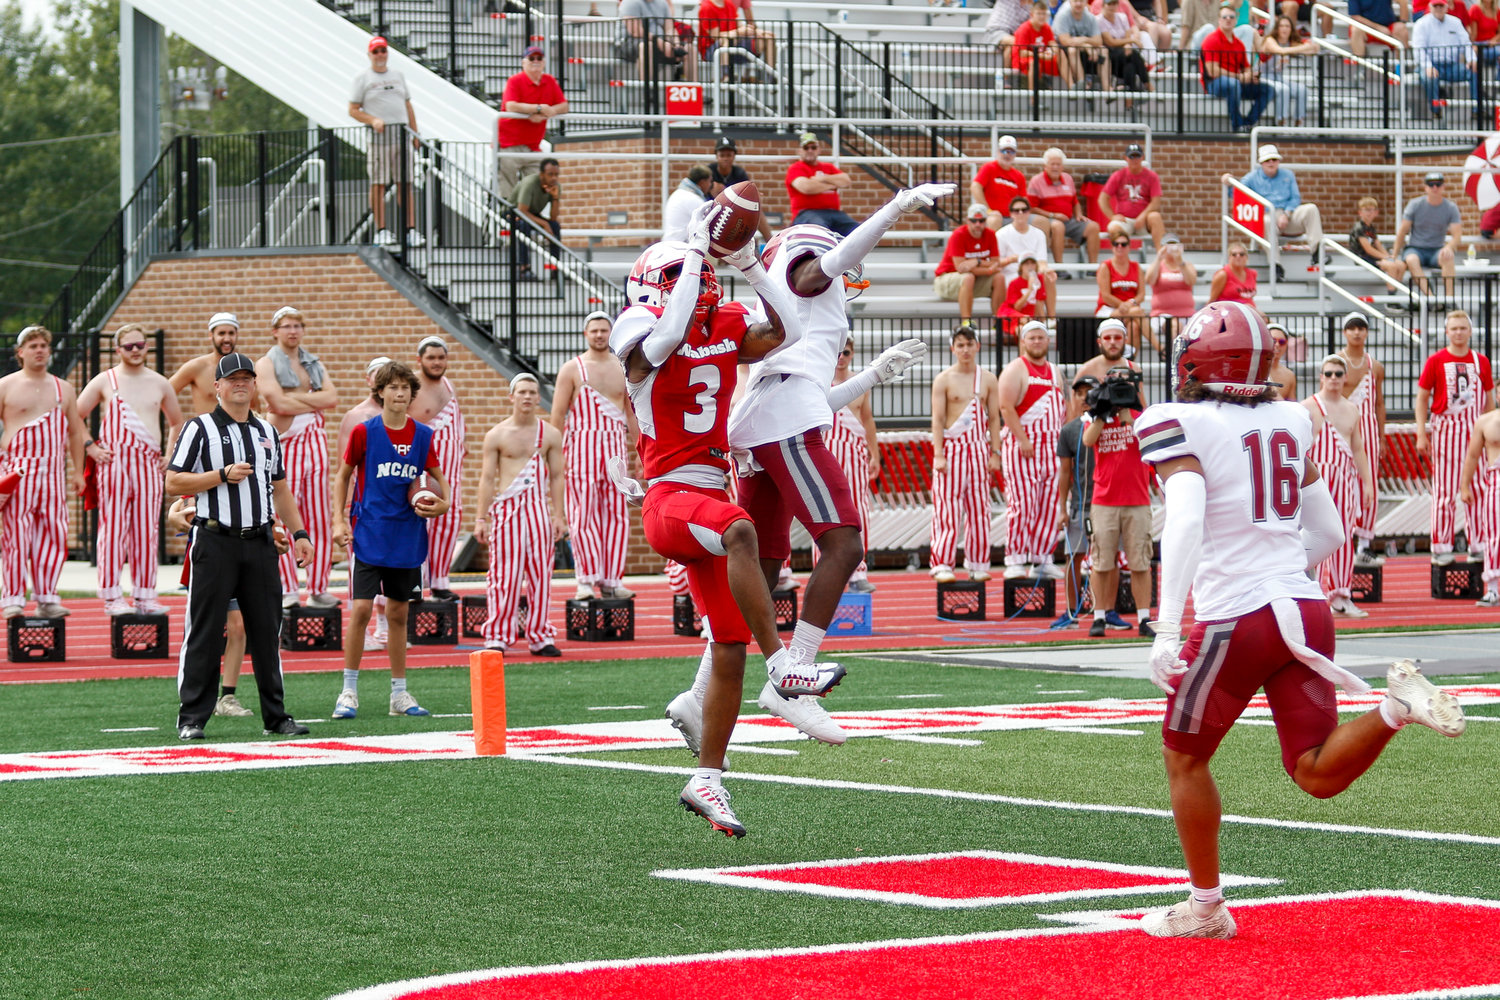 Junior Wide-Receiver Derek Allen had a monster game for the Little Giants with 160 yards receiving and three touchdowns in Wabash’s 52-48 season opening win over Hampden Sydney on Saturday.